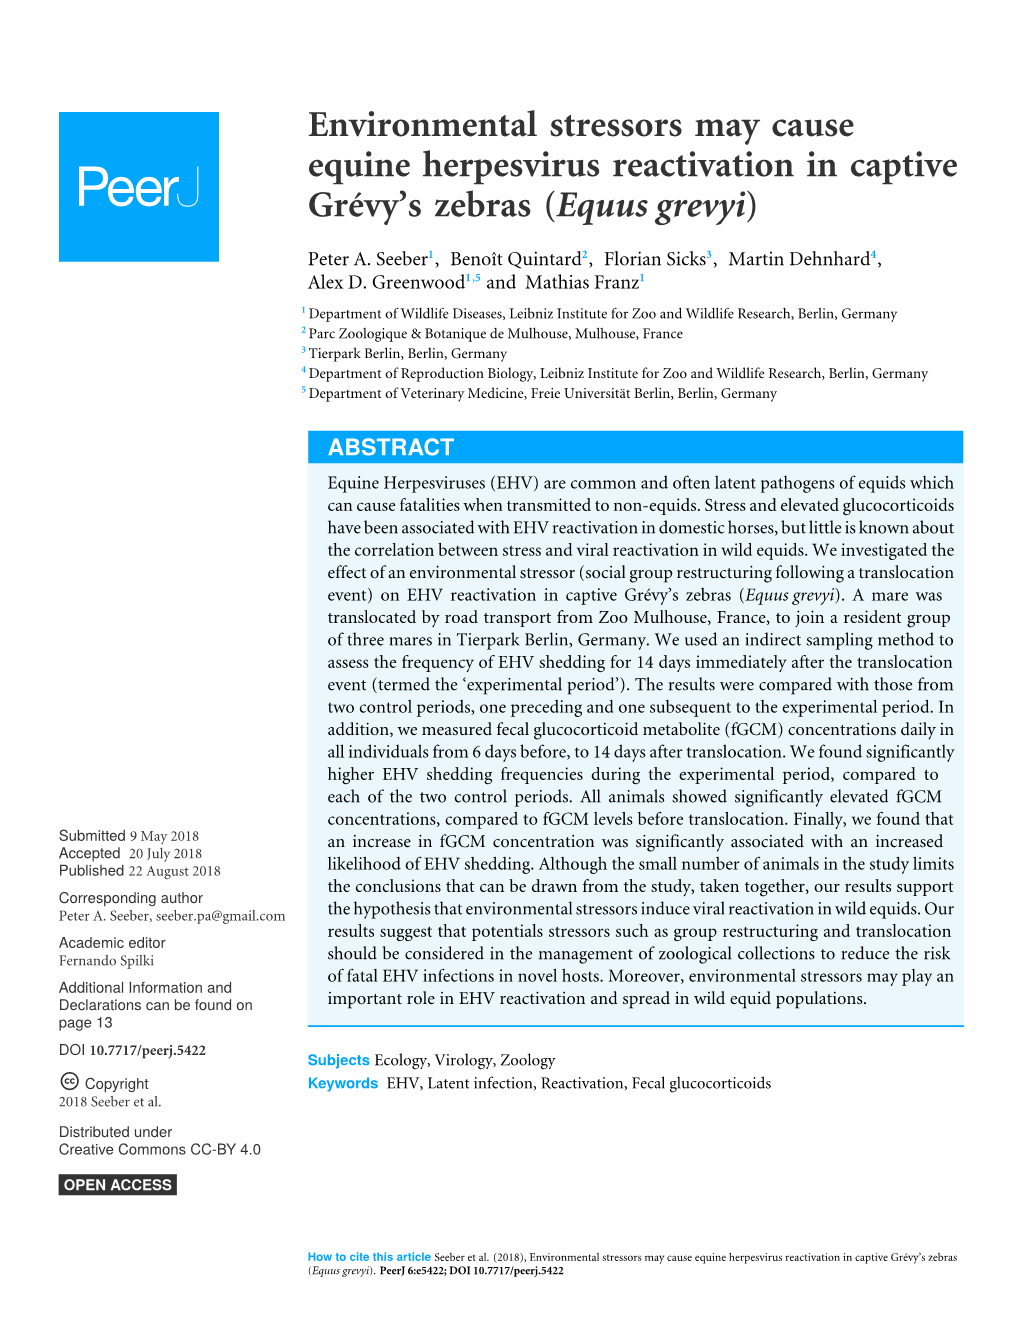 Environmental Stressors May Cause Equine Herpesvirus Reactivation in Captive Grévy’S Zebras (Equus Grevyi)